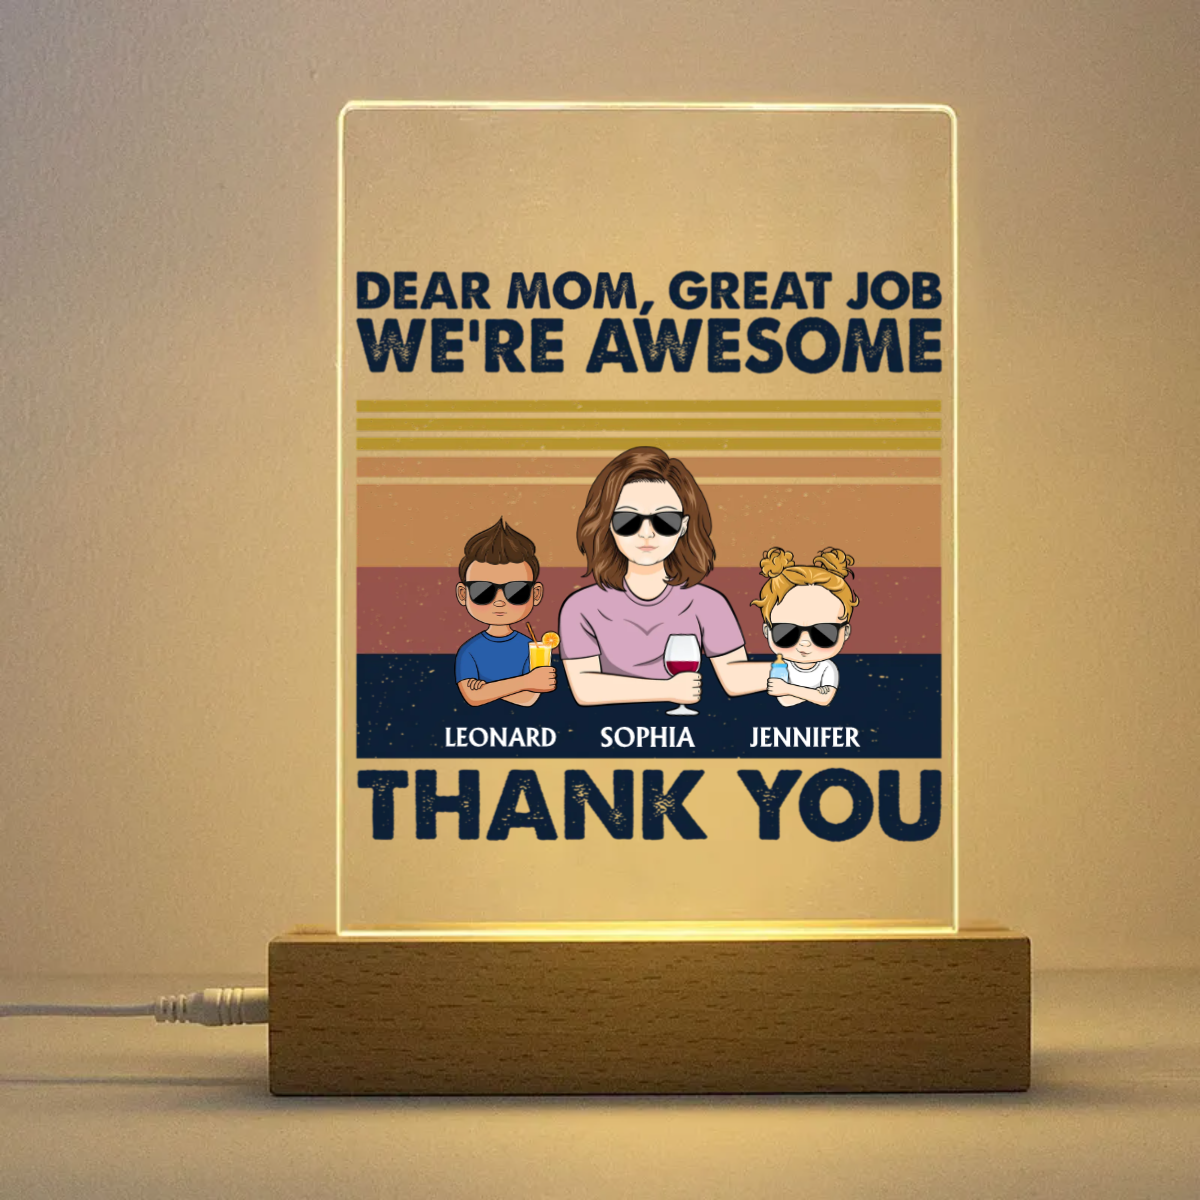 Dear Mom Mum Mam Great Job We're Awesome Thank You Young - Mother Gift - Personalized Rectangle Acrylic Plaque LED Lamp Night Light